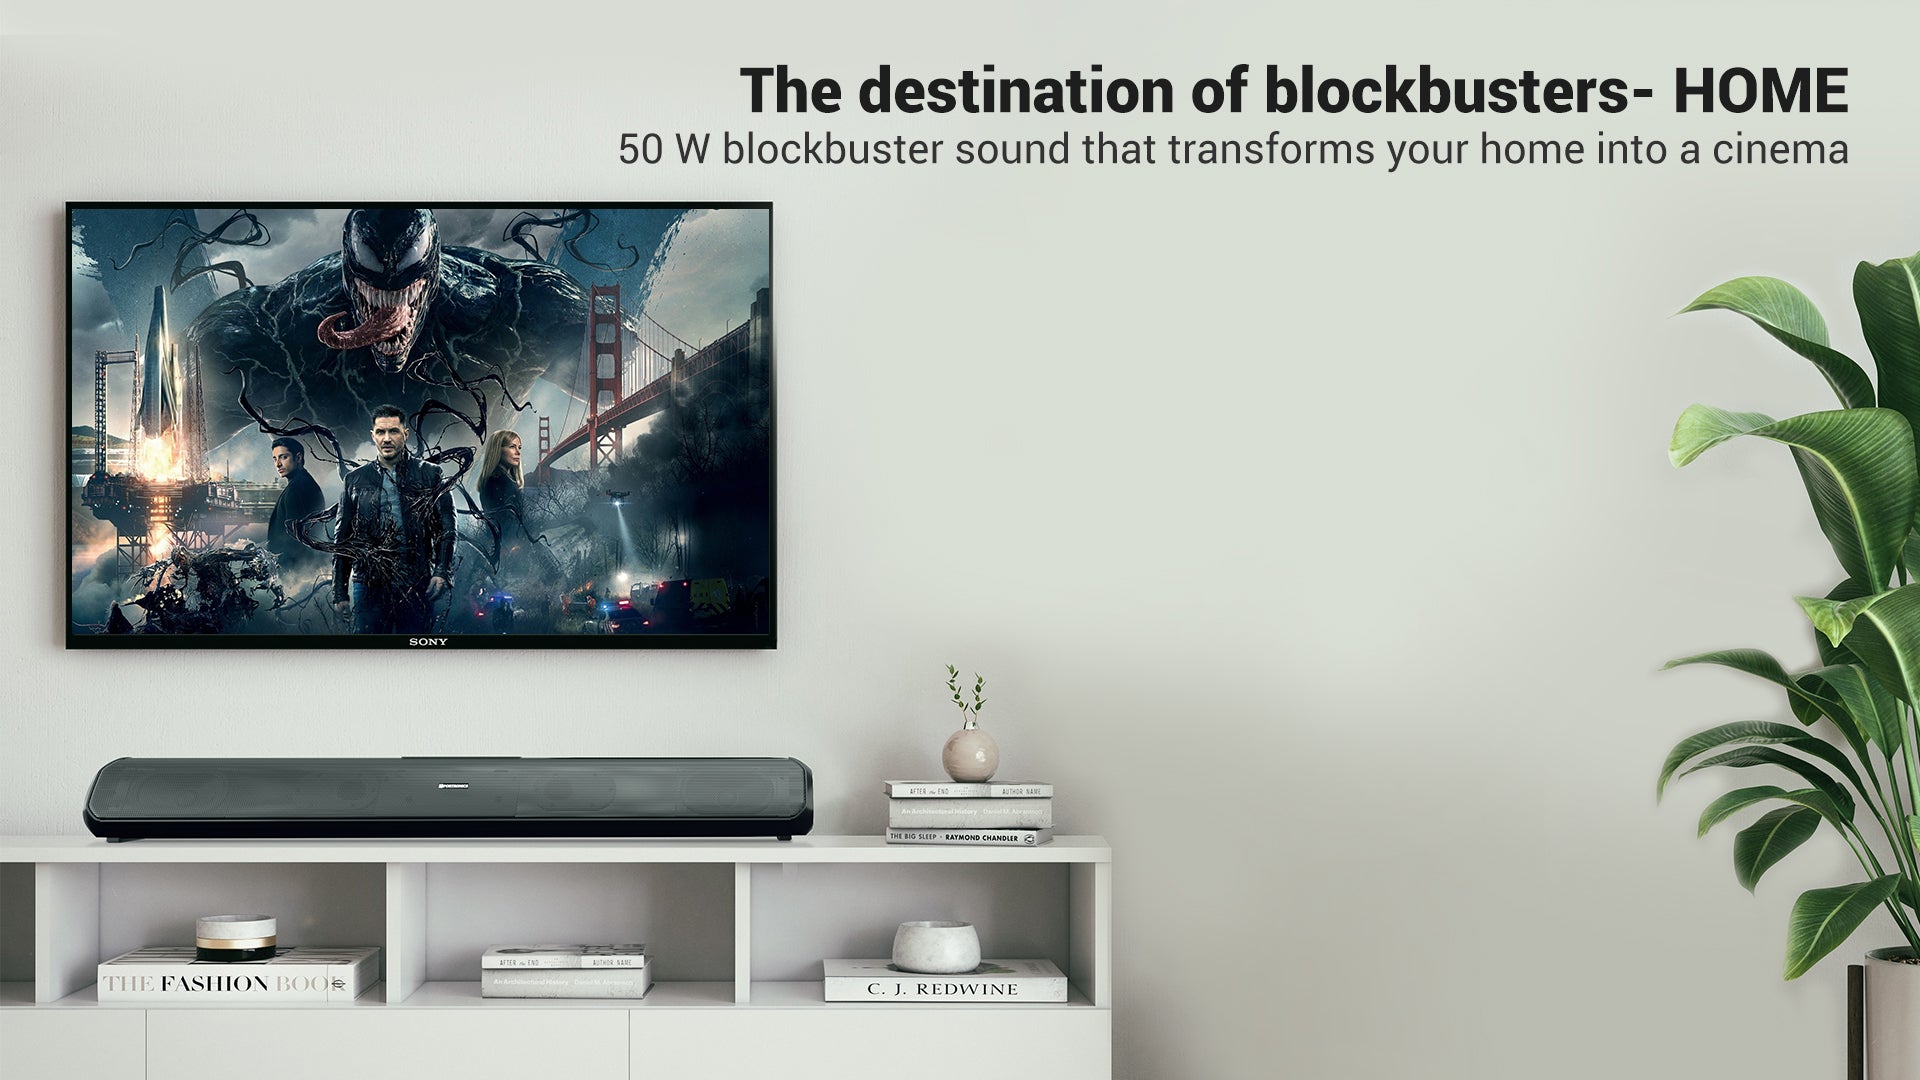 Portronics 50 W blockbuster sound that transforms your home into a cinema.